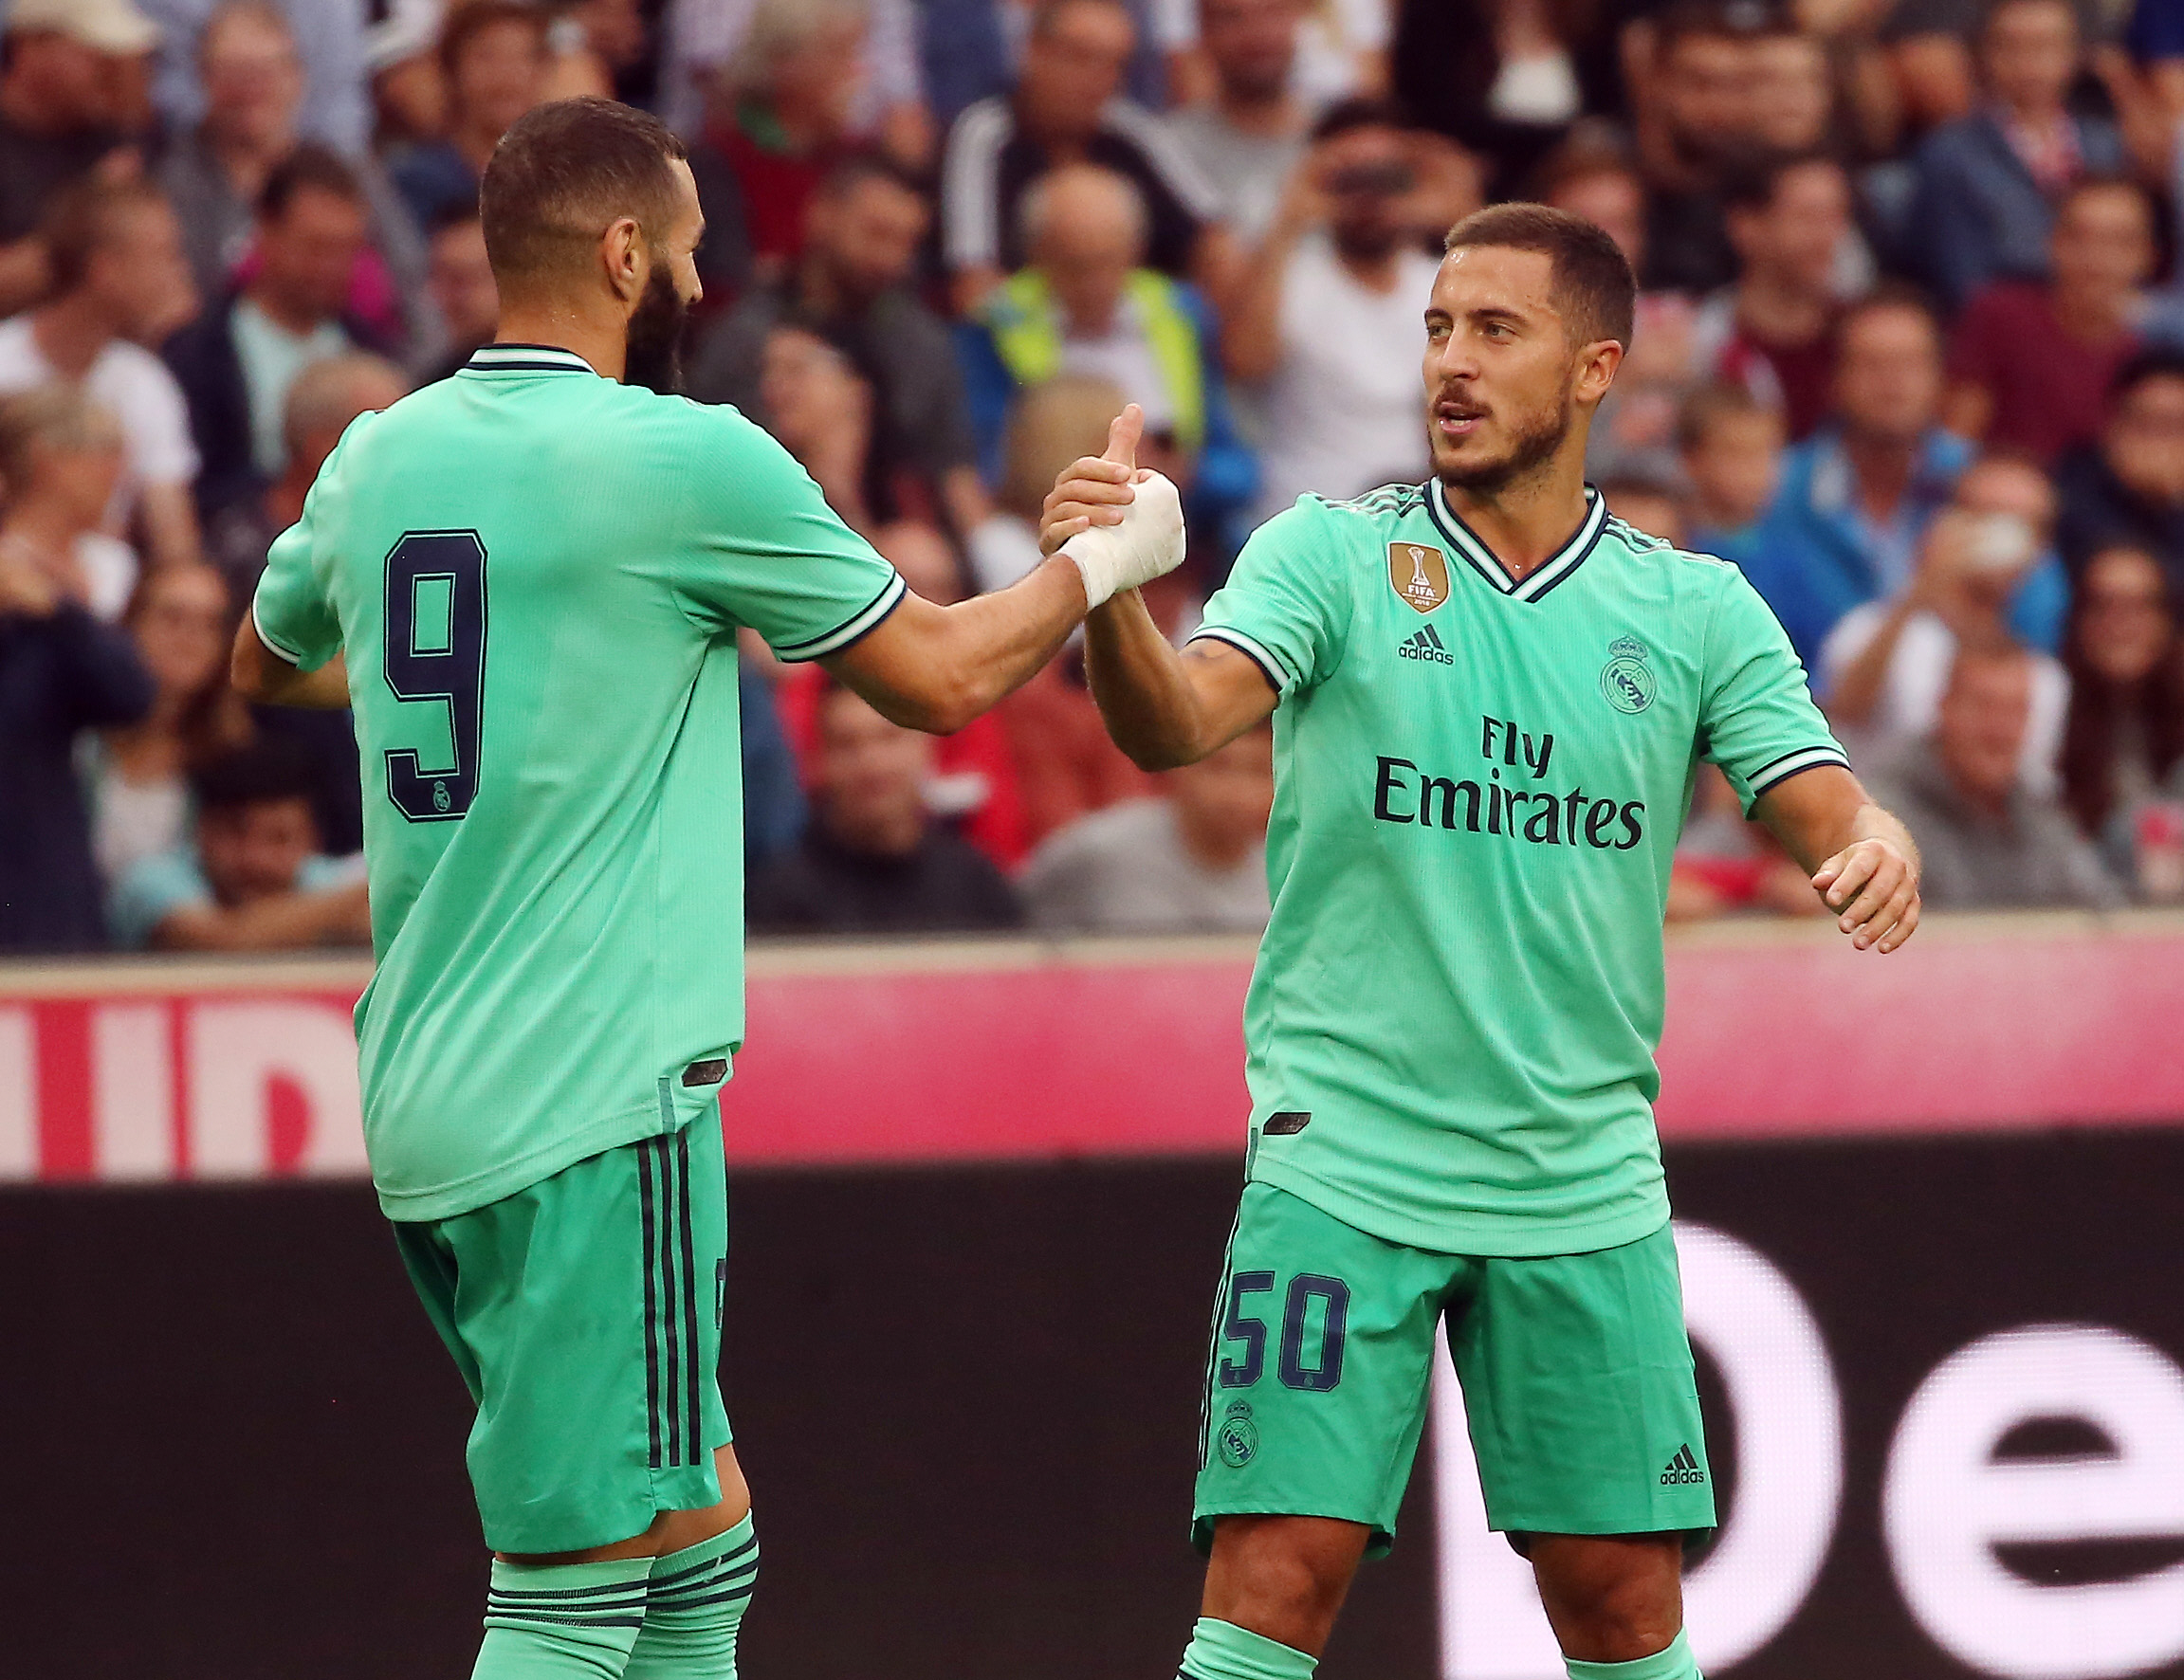 eden hazard scored his first goal for real madrid in a 1 0 pre season friendly win over red bull salzburg on wednesday photo afp